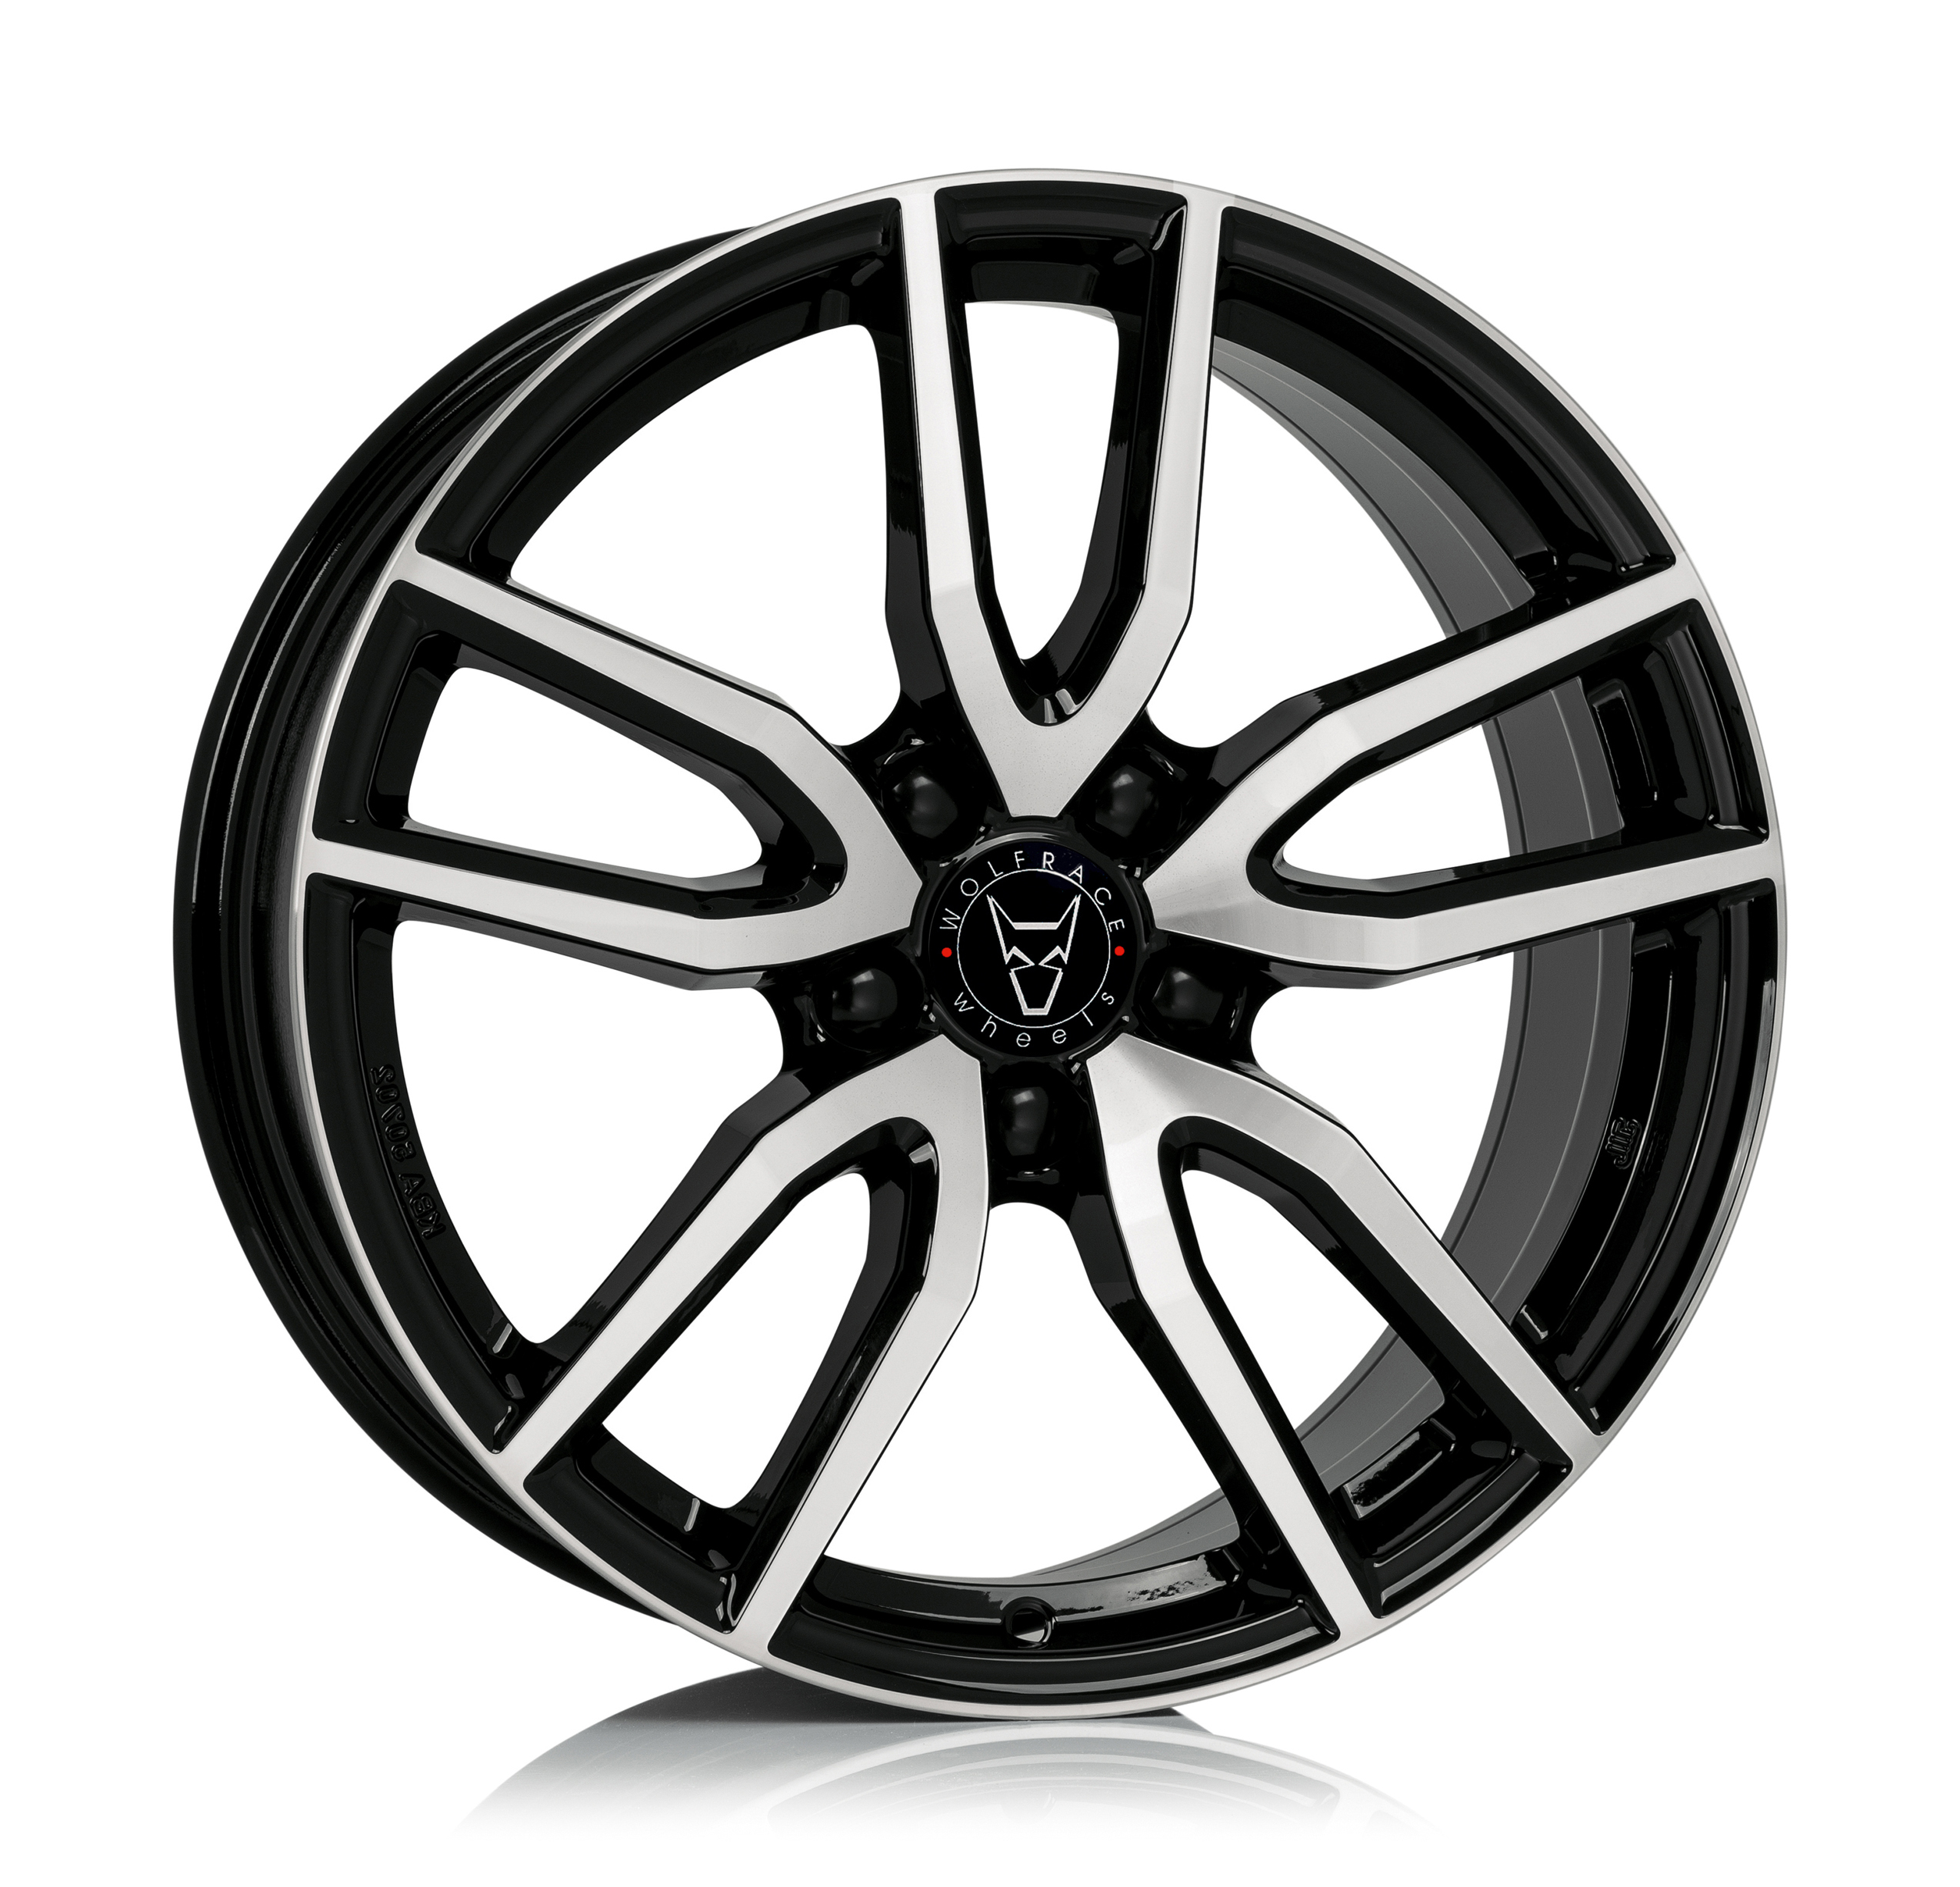 Wolfrace GB range expands with Torino in two finishes - Tyrepress.com